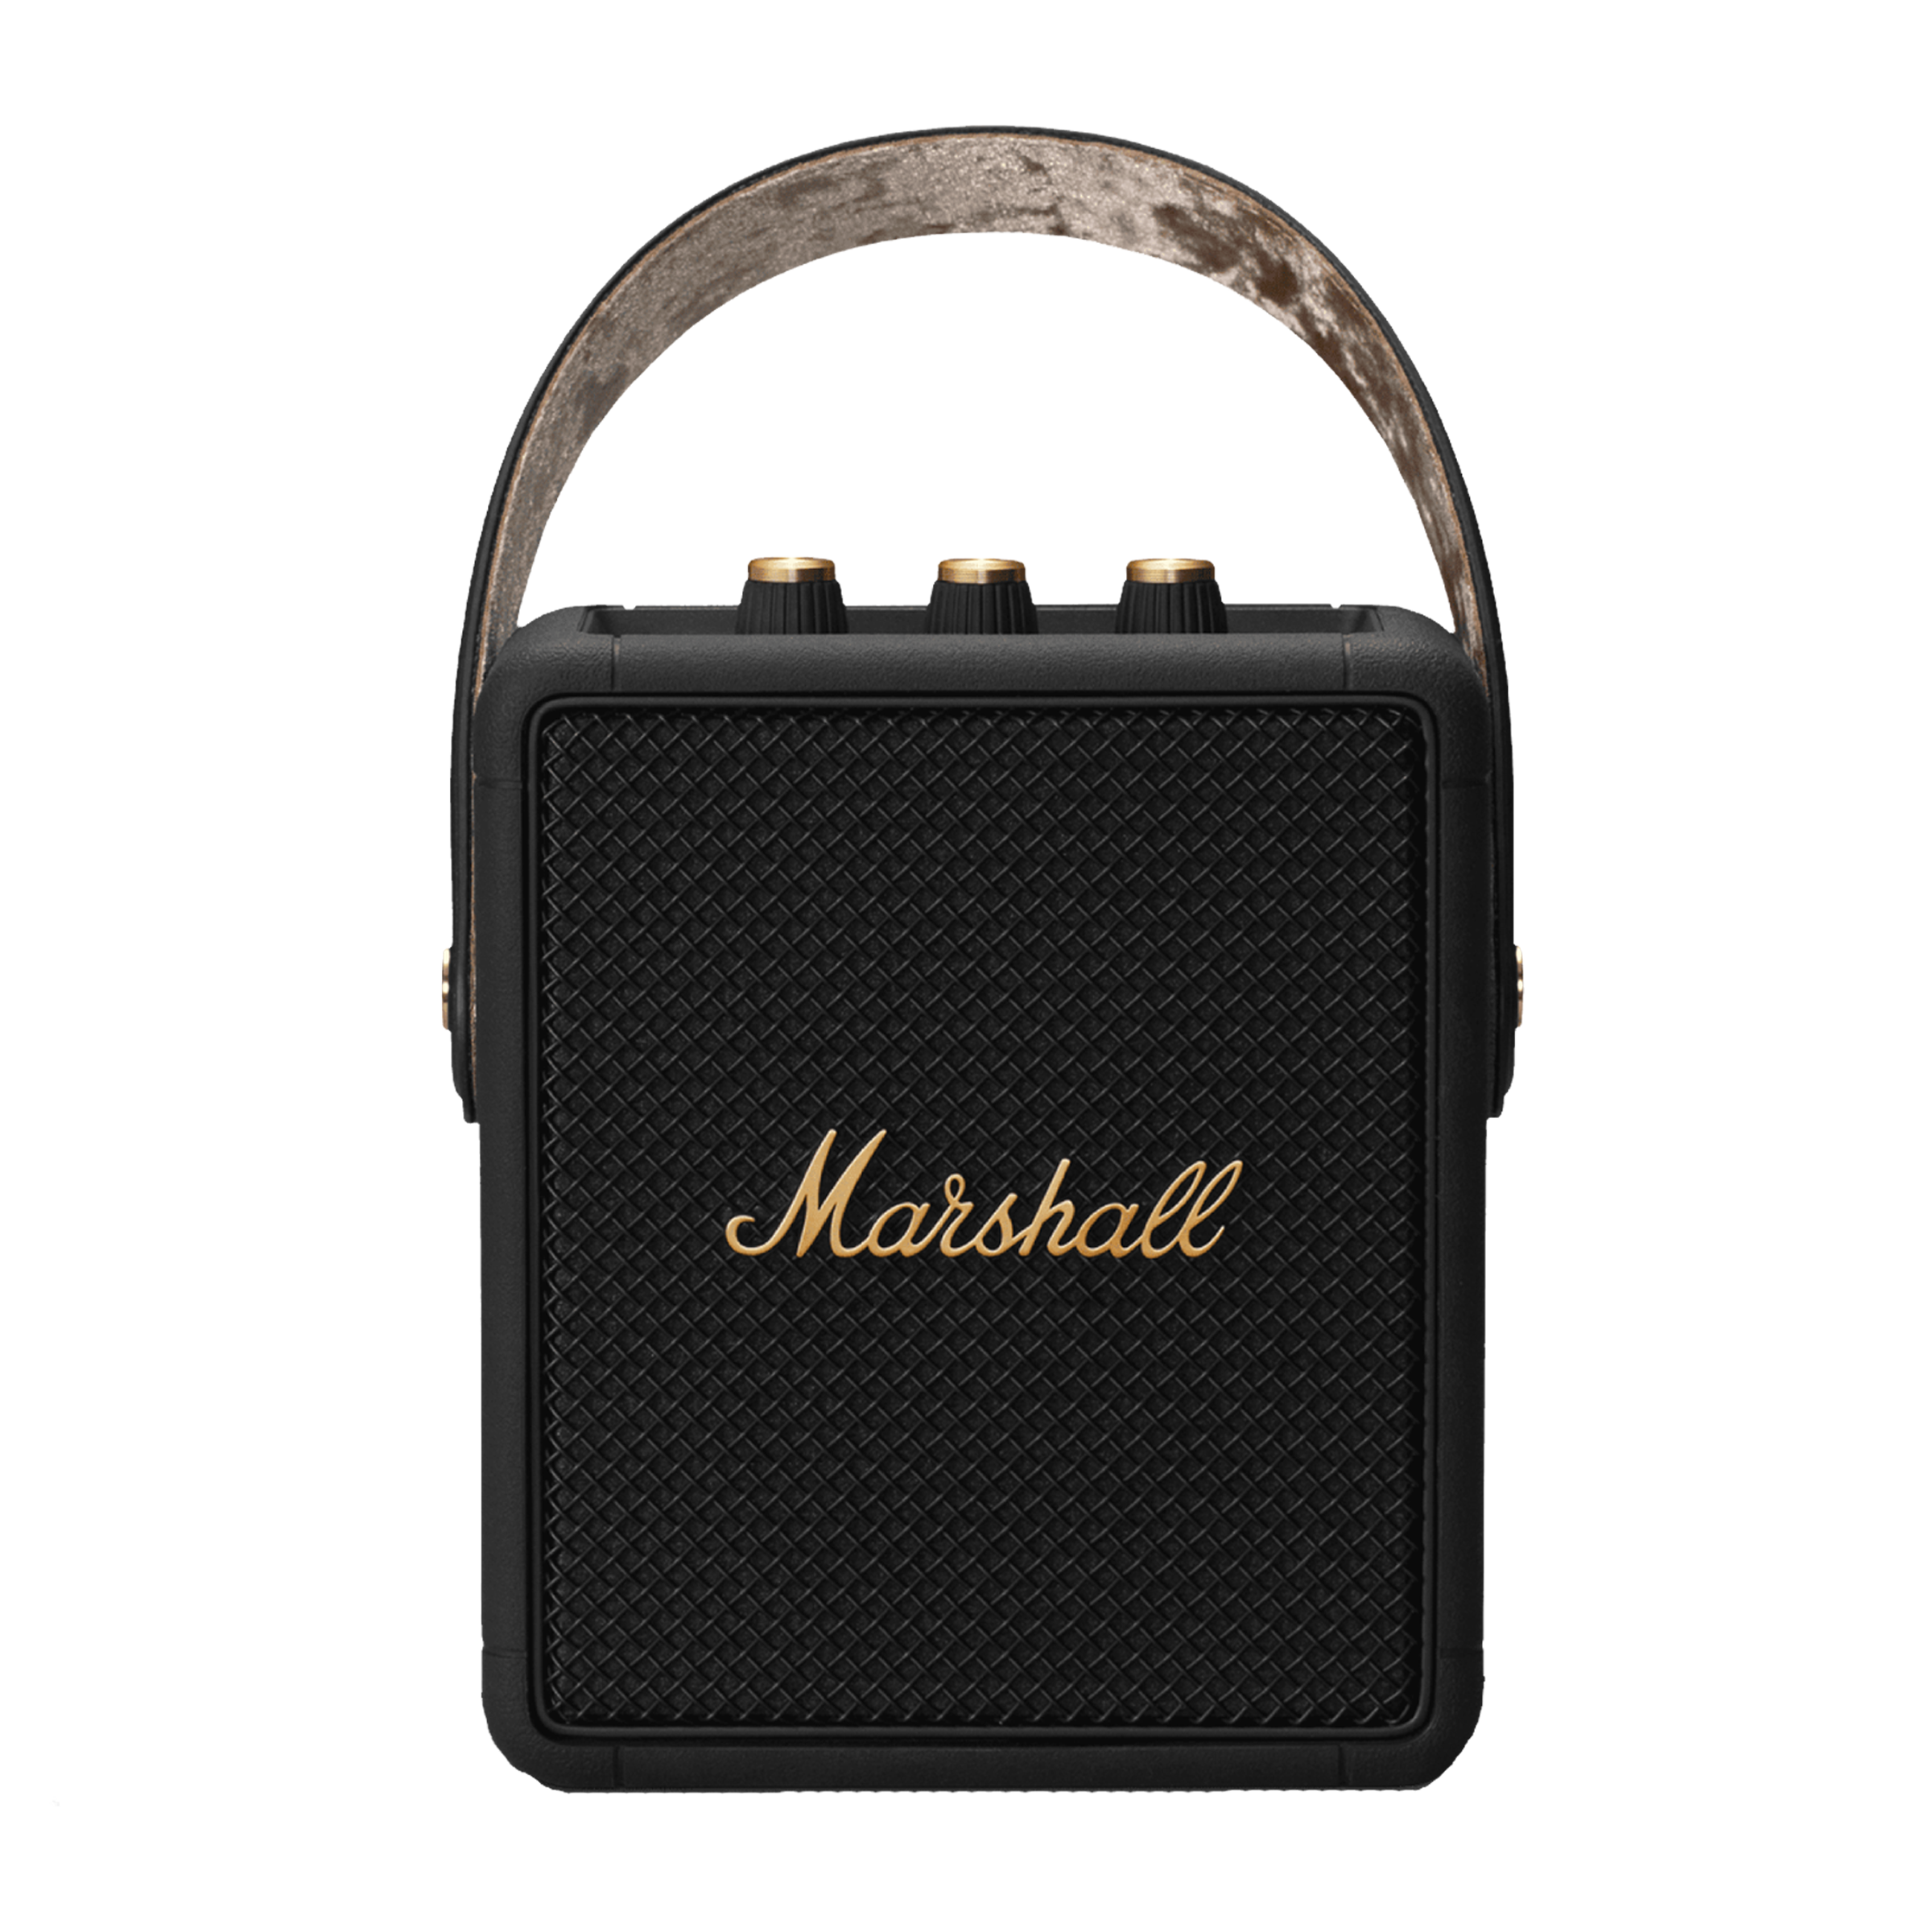 Marshall Stockwell II 20W Portable Bluetooth Speaker (IPX4 Water Resistant, 20 Hours Playtime, Stereo Channel, Black/Brass)